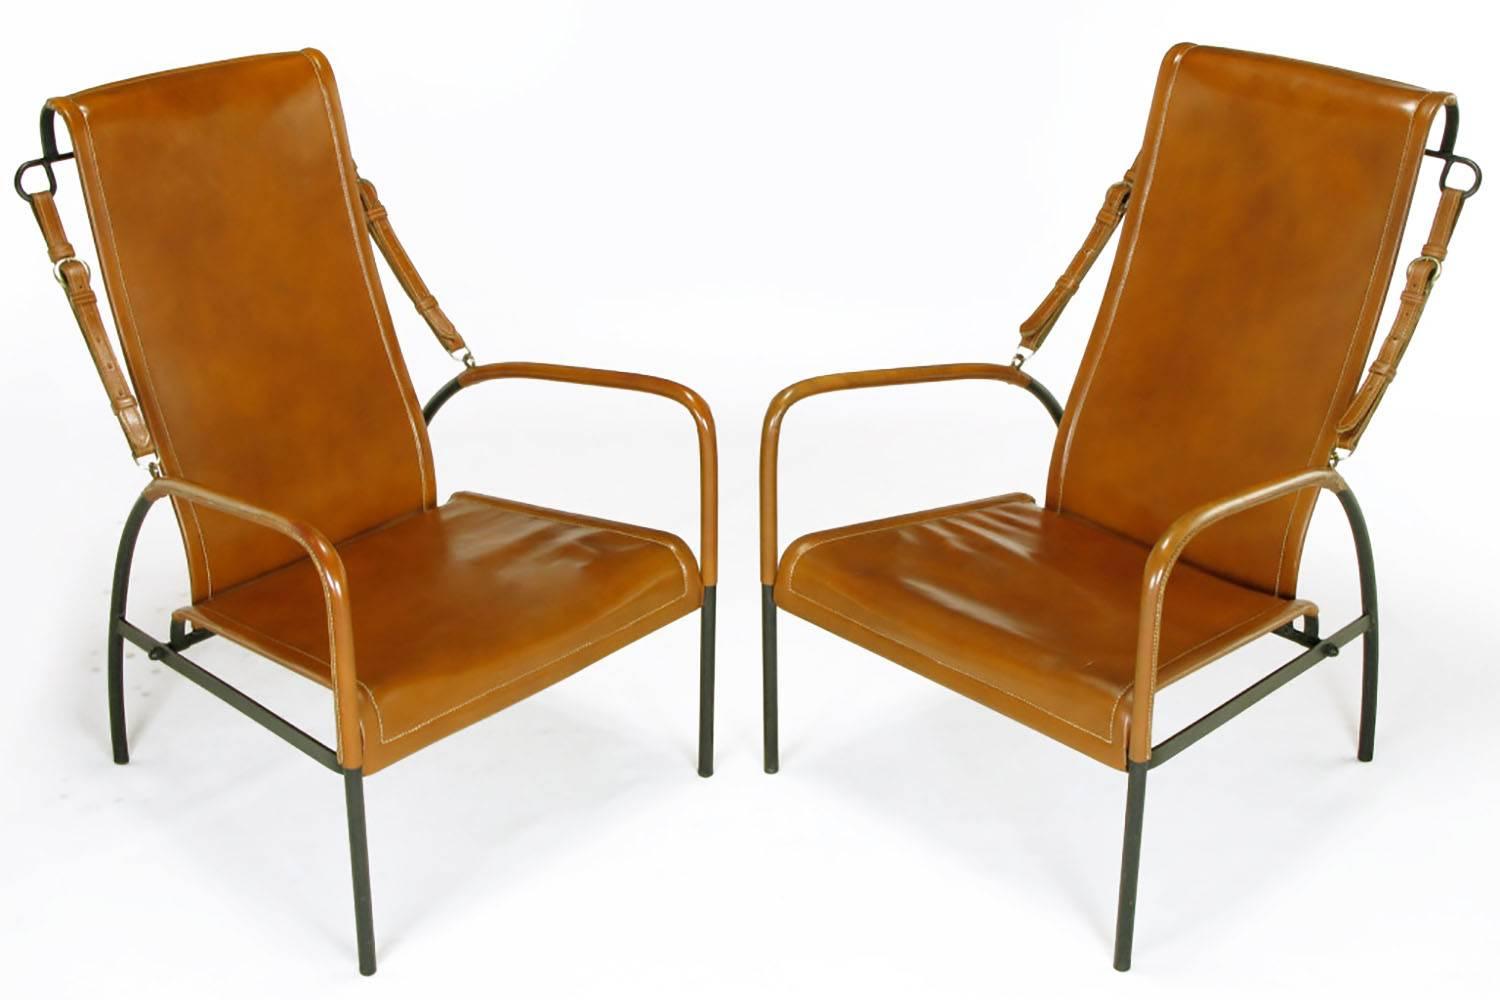 Pair of custom leather lounge chairs with wrought iron frames and saddle leather seats and backs in the style of Jacques Adnet. Fabricated in Chicago by Paul's Custom Saddlery and Harness for the owners of an Illinois equestrian estate. Saddle